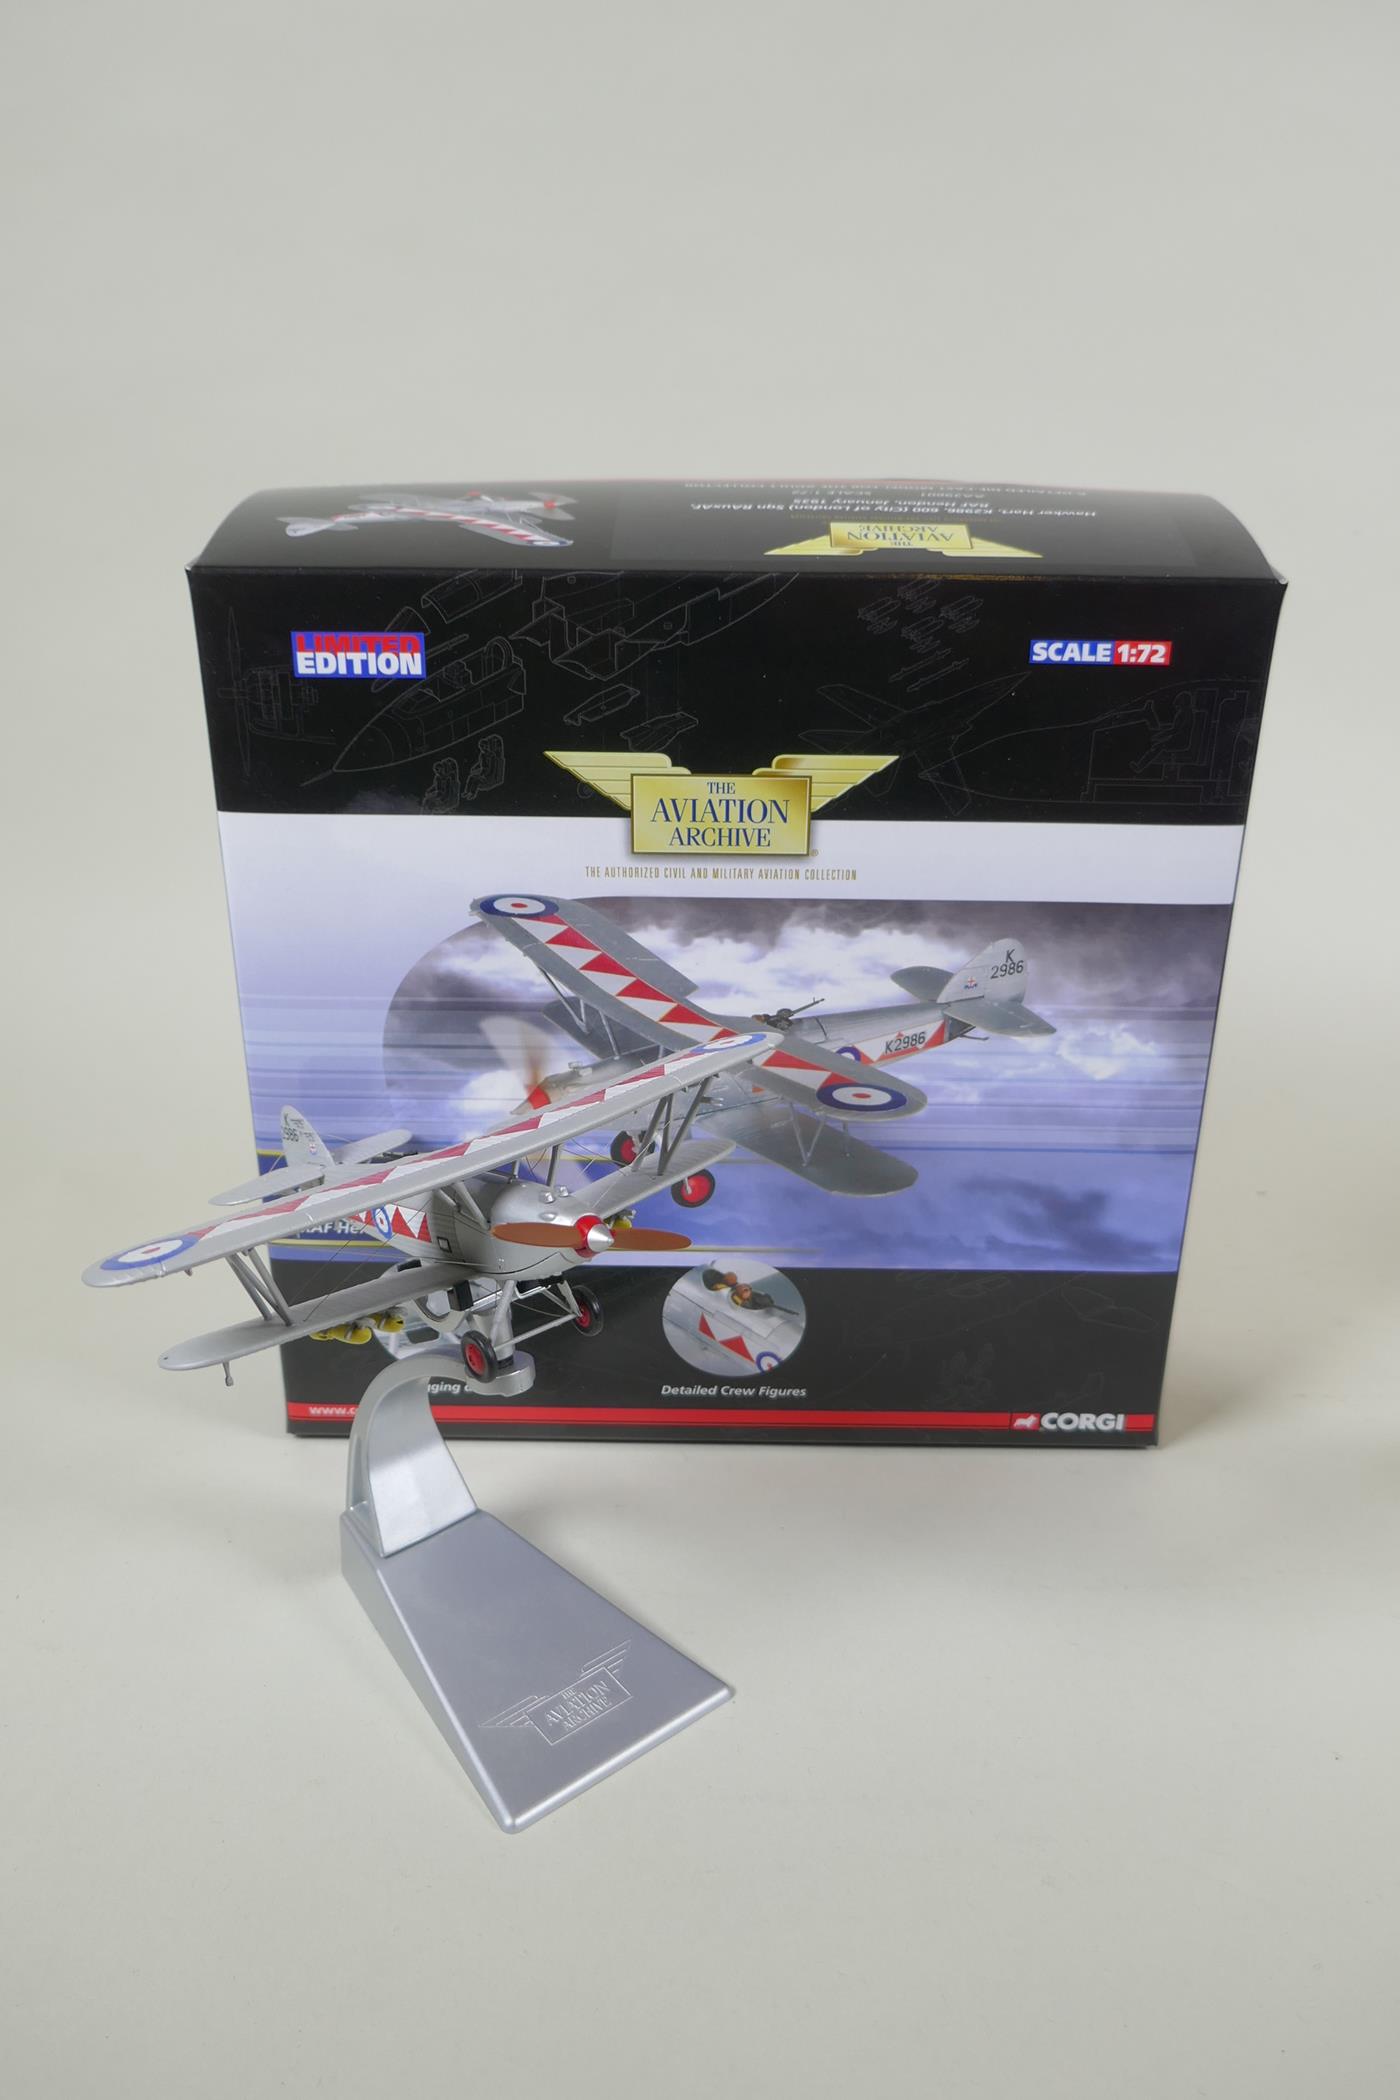 Four Corgi limited edition Aviation Archive diecast 1:72 scale models, including a Hawker Hart, - Image 3 of 6